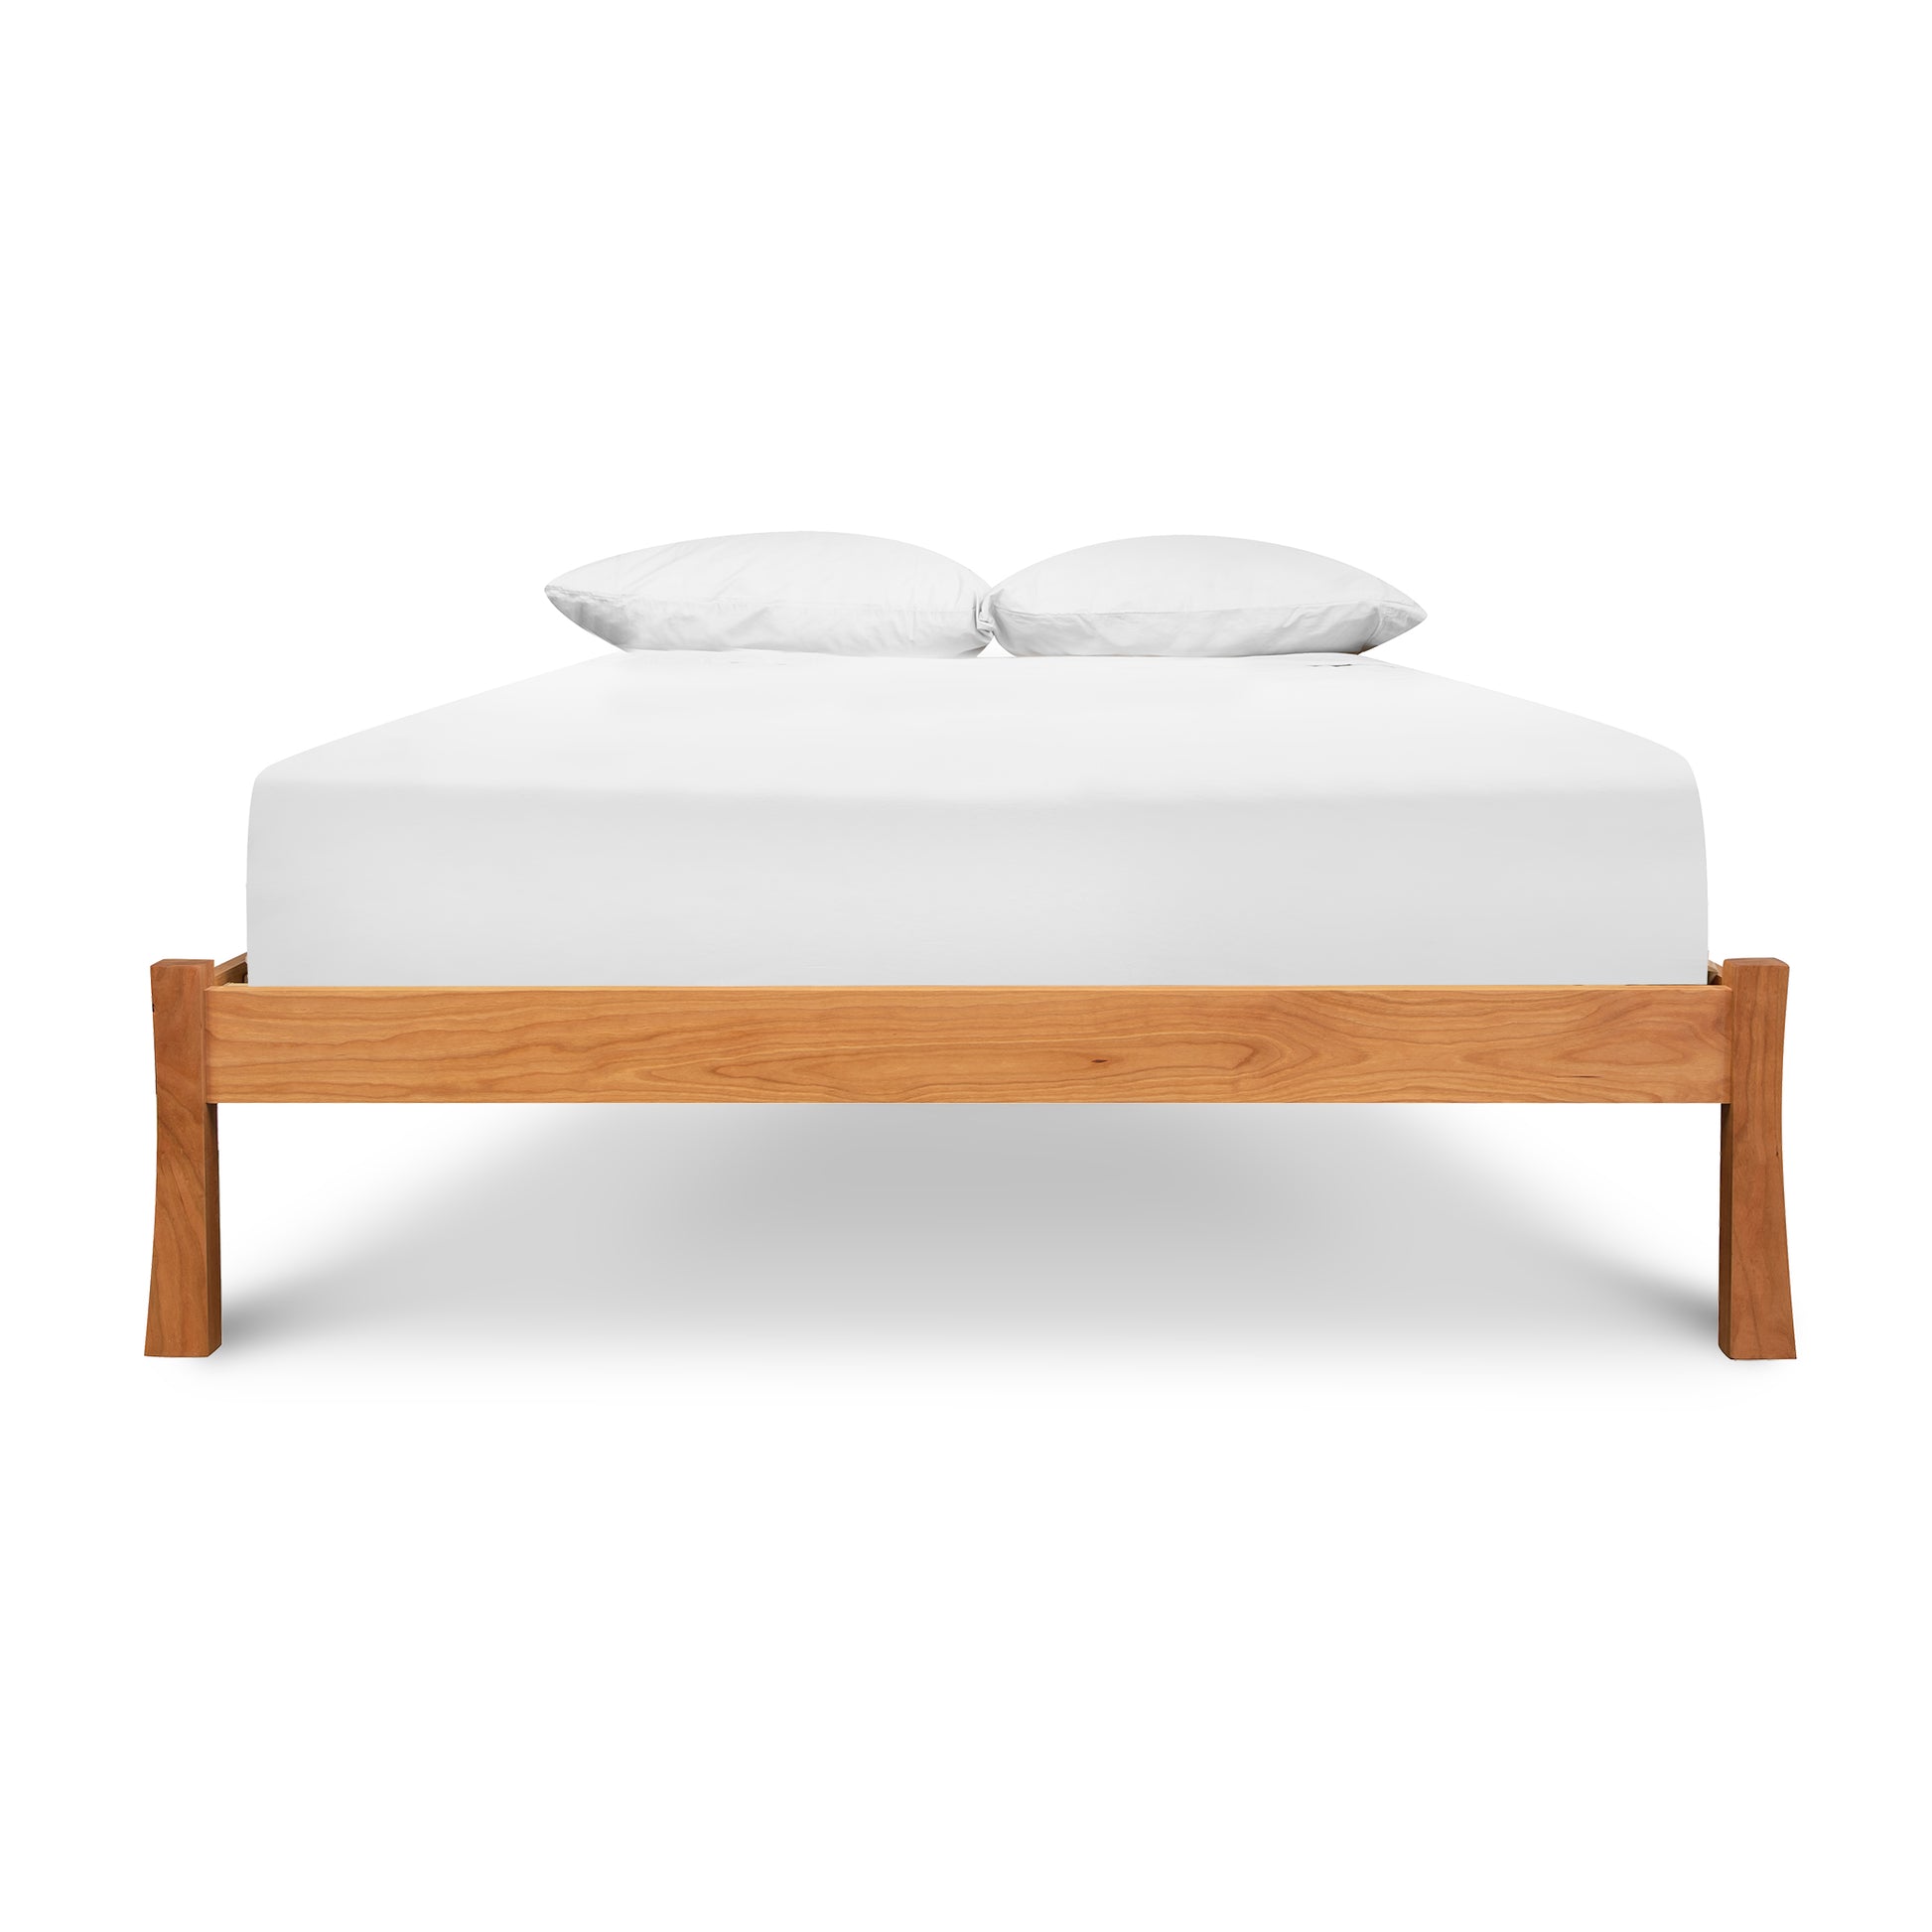 A minimalist Vermont Furniture Designs Contemporary Craftsman Studio-Style Platform Bed with white sheets, perfect for a contemporary bedroom.